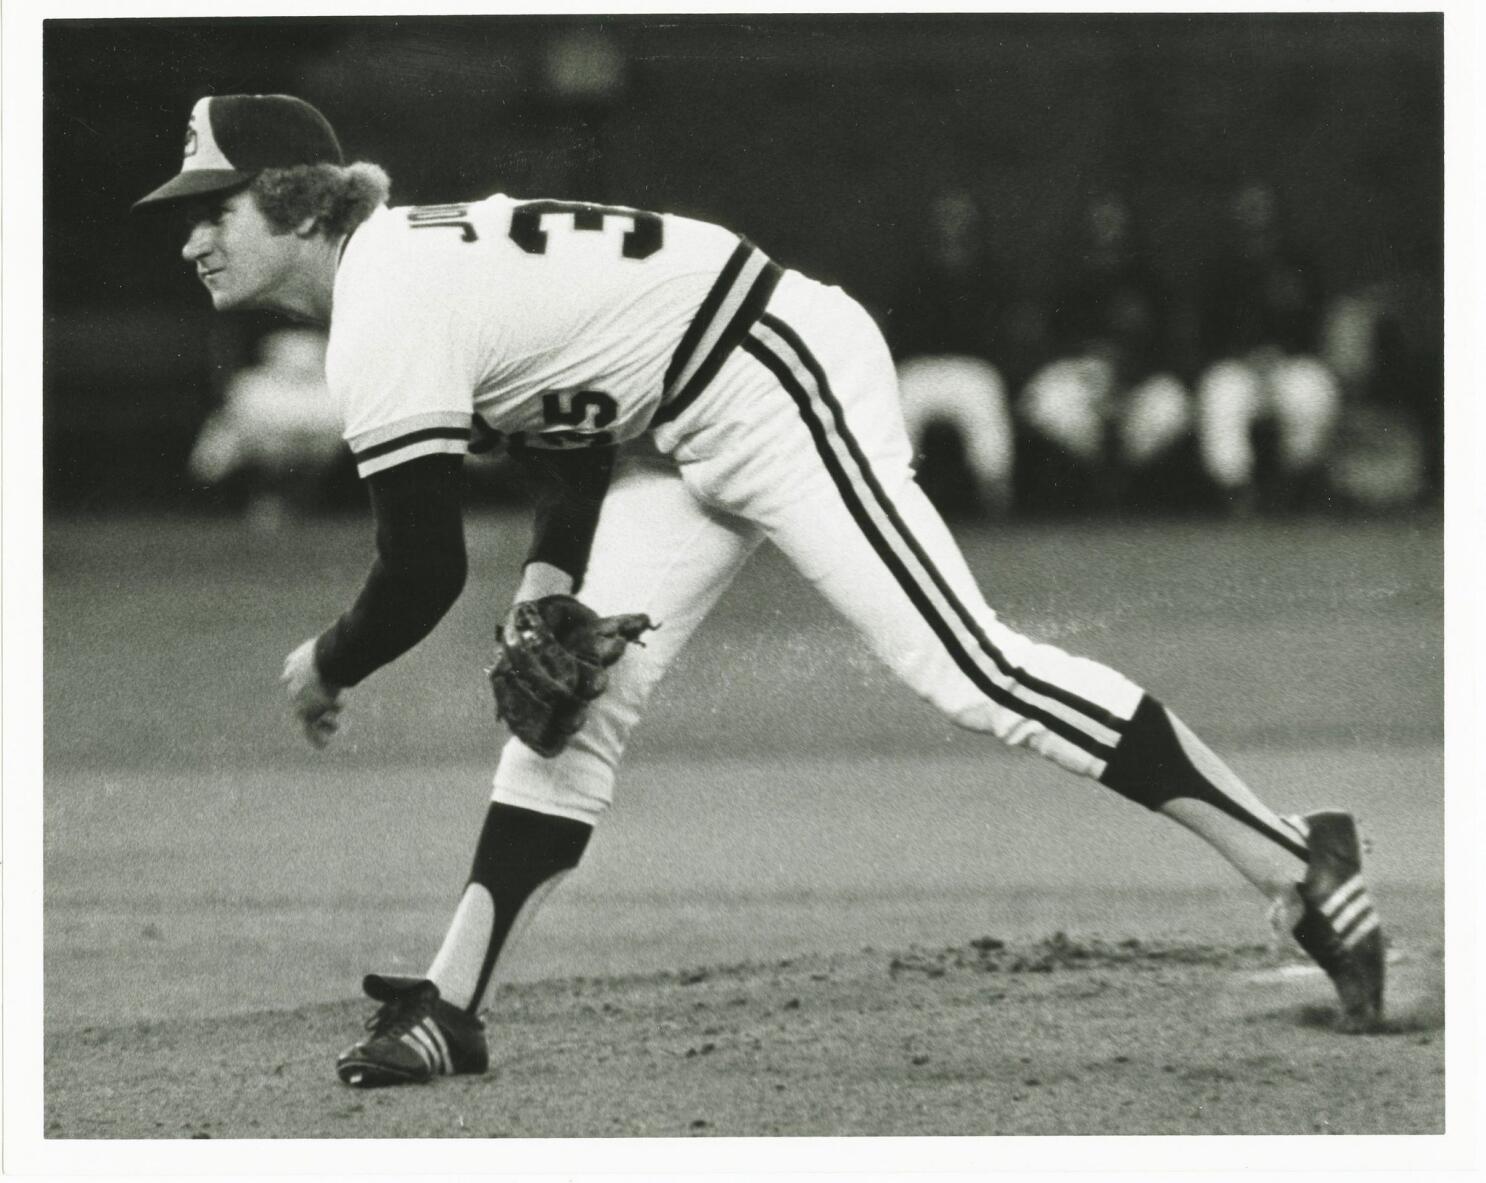 The Archive: The time Steve Carlton talked